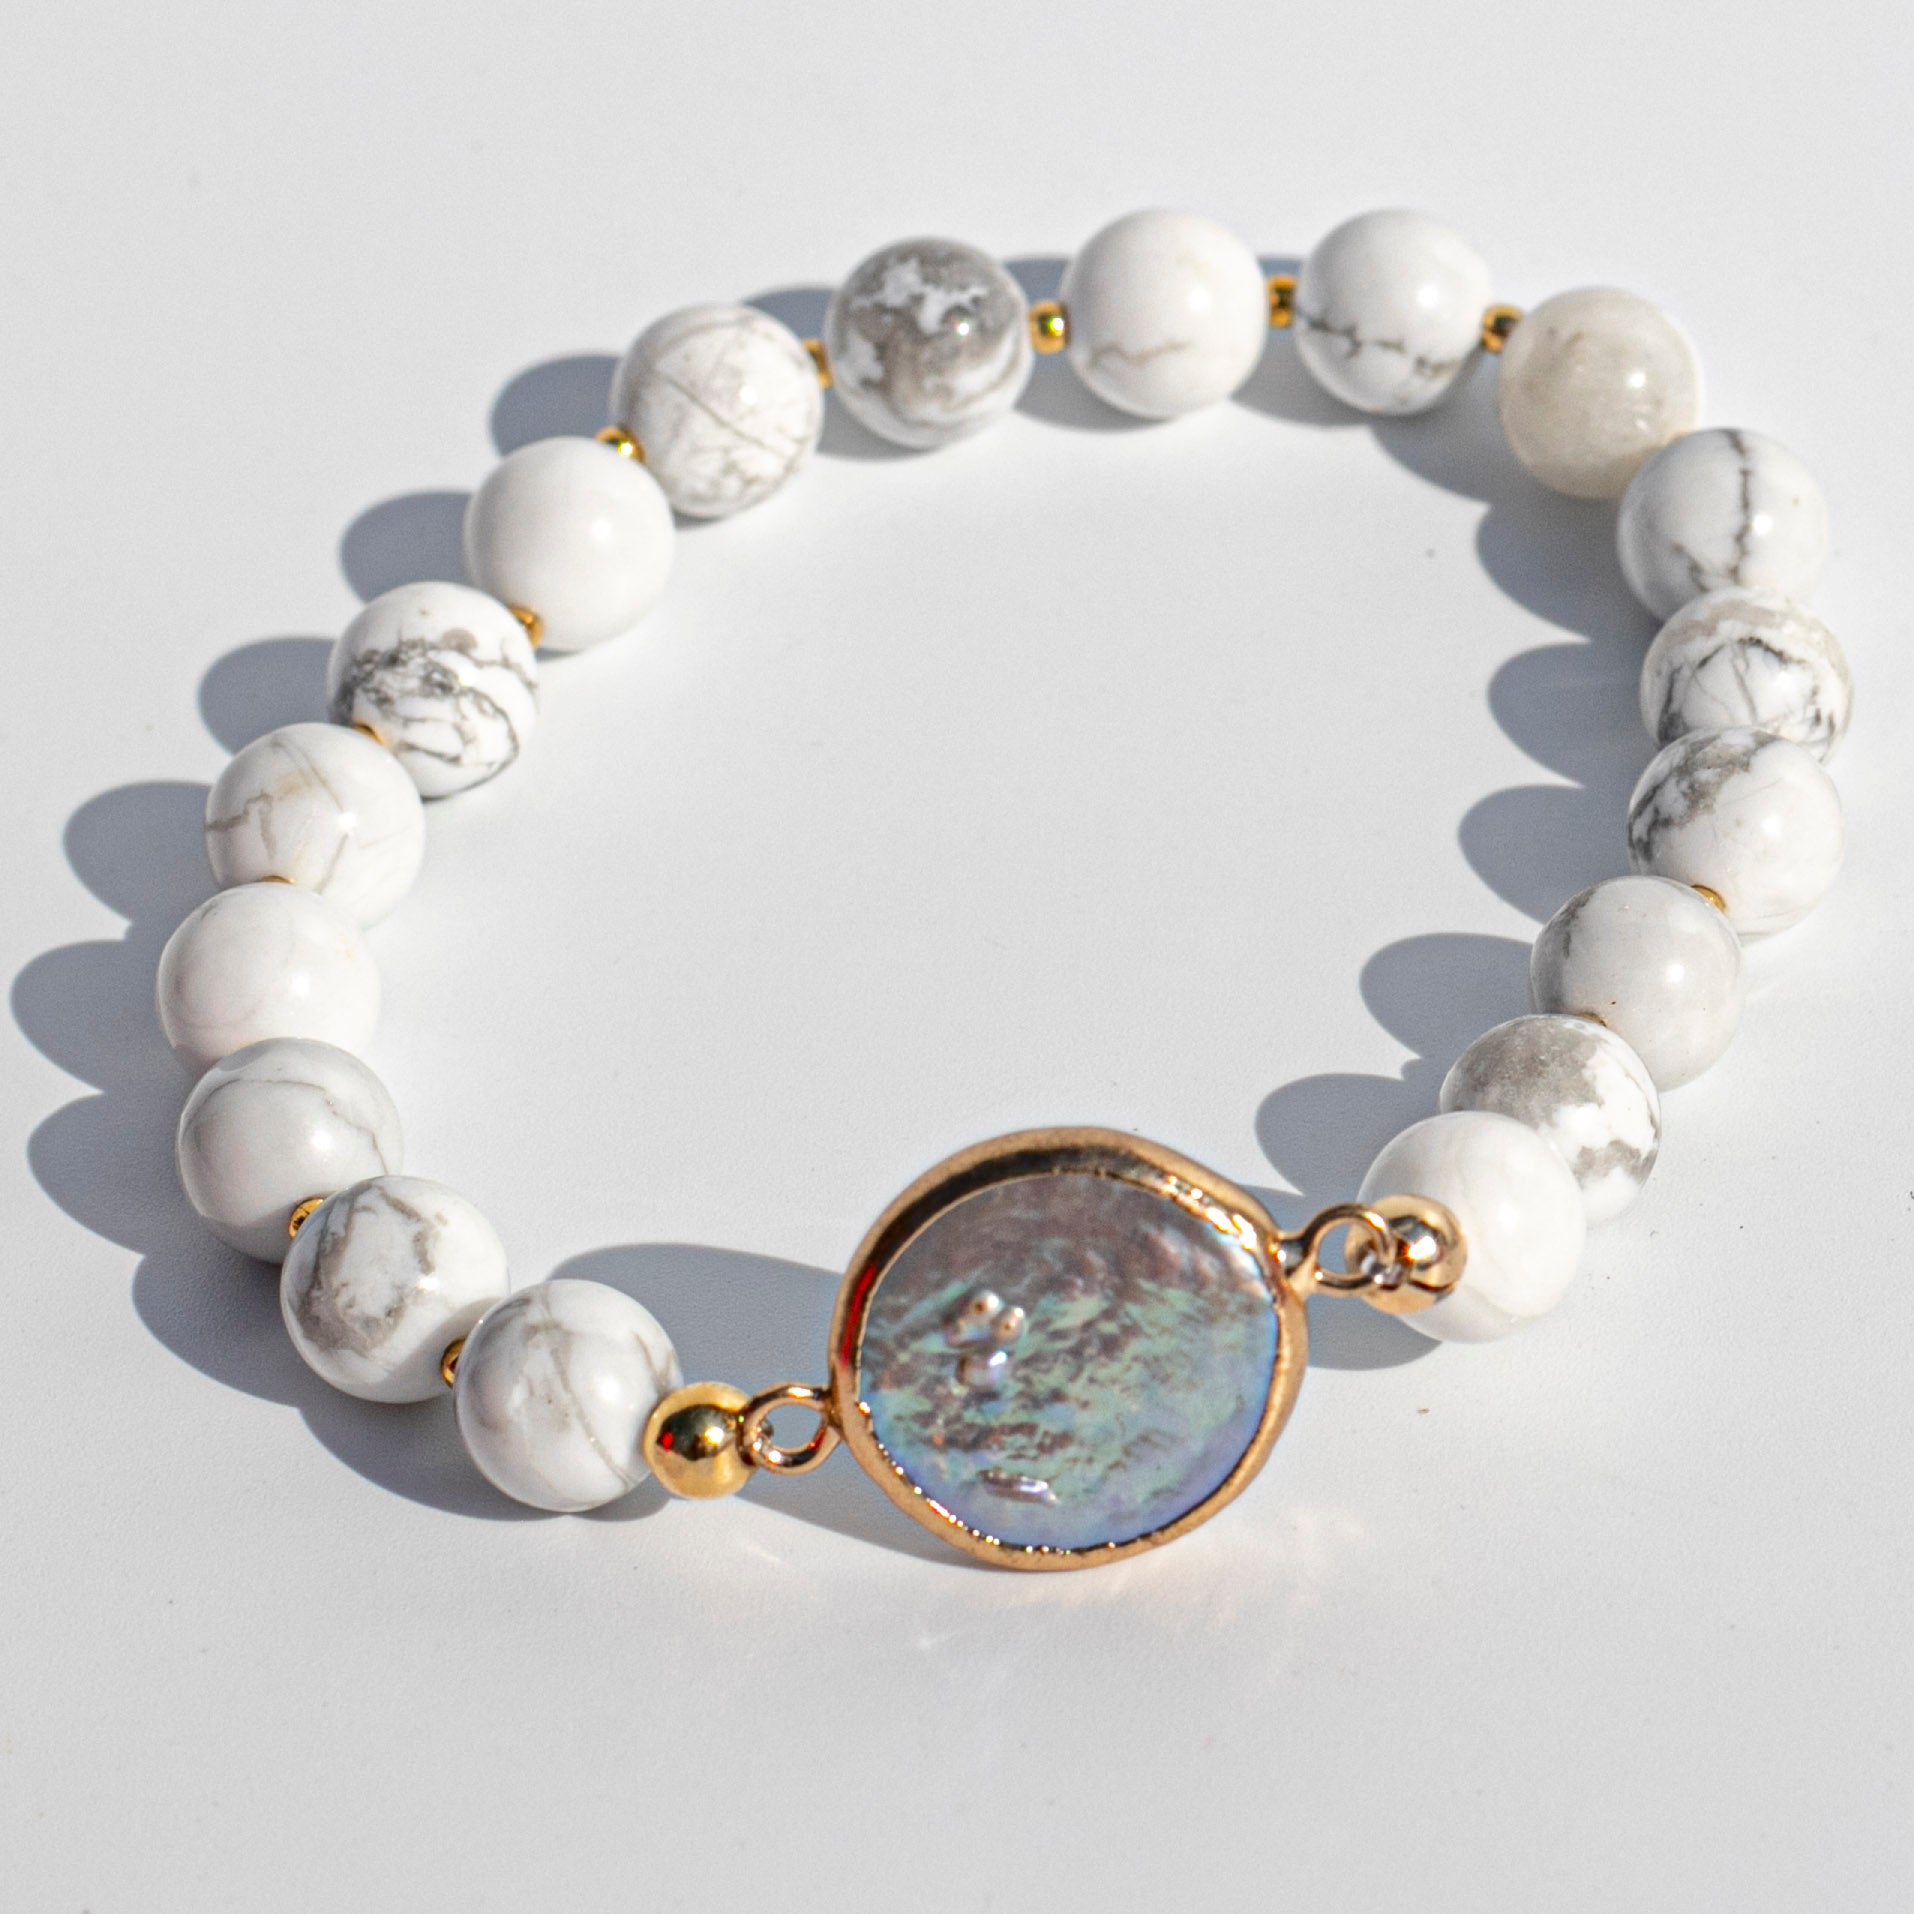 Howlite (白紋石) | Gold Bezel Pearl (珍珠) | Stretchy Cord Bracelet with Gold Plated Spacers